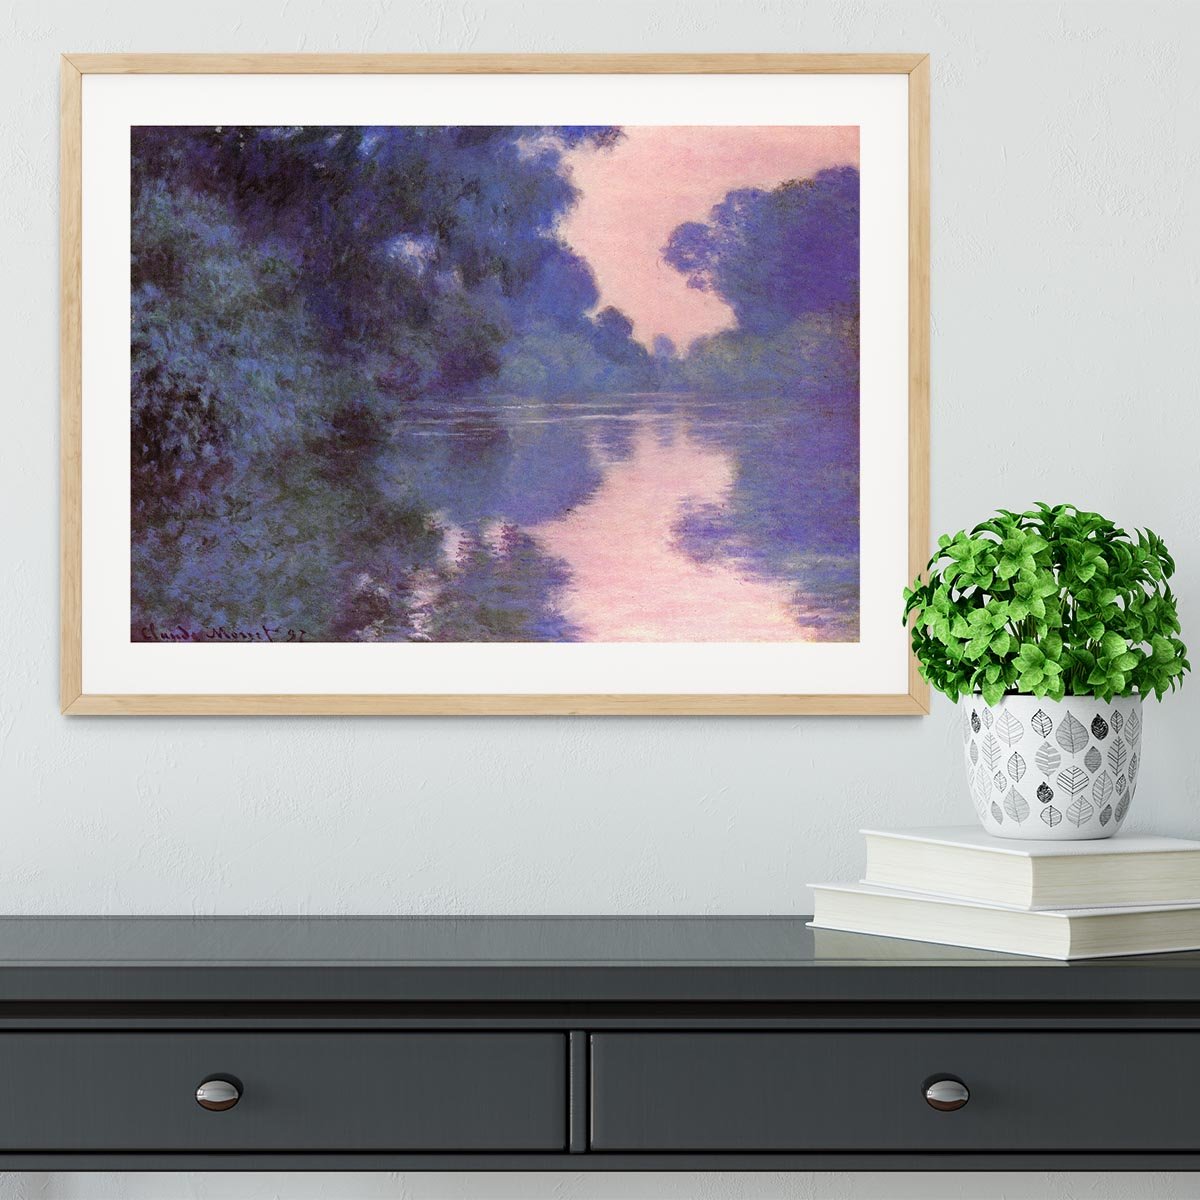 Seine arm at Giverny by Monet Framed Print - Canvas Art Rocks - 3